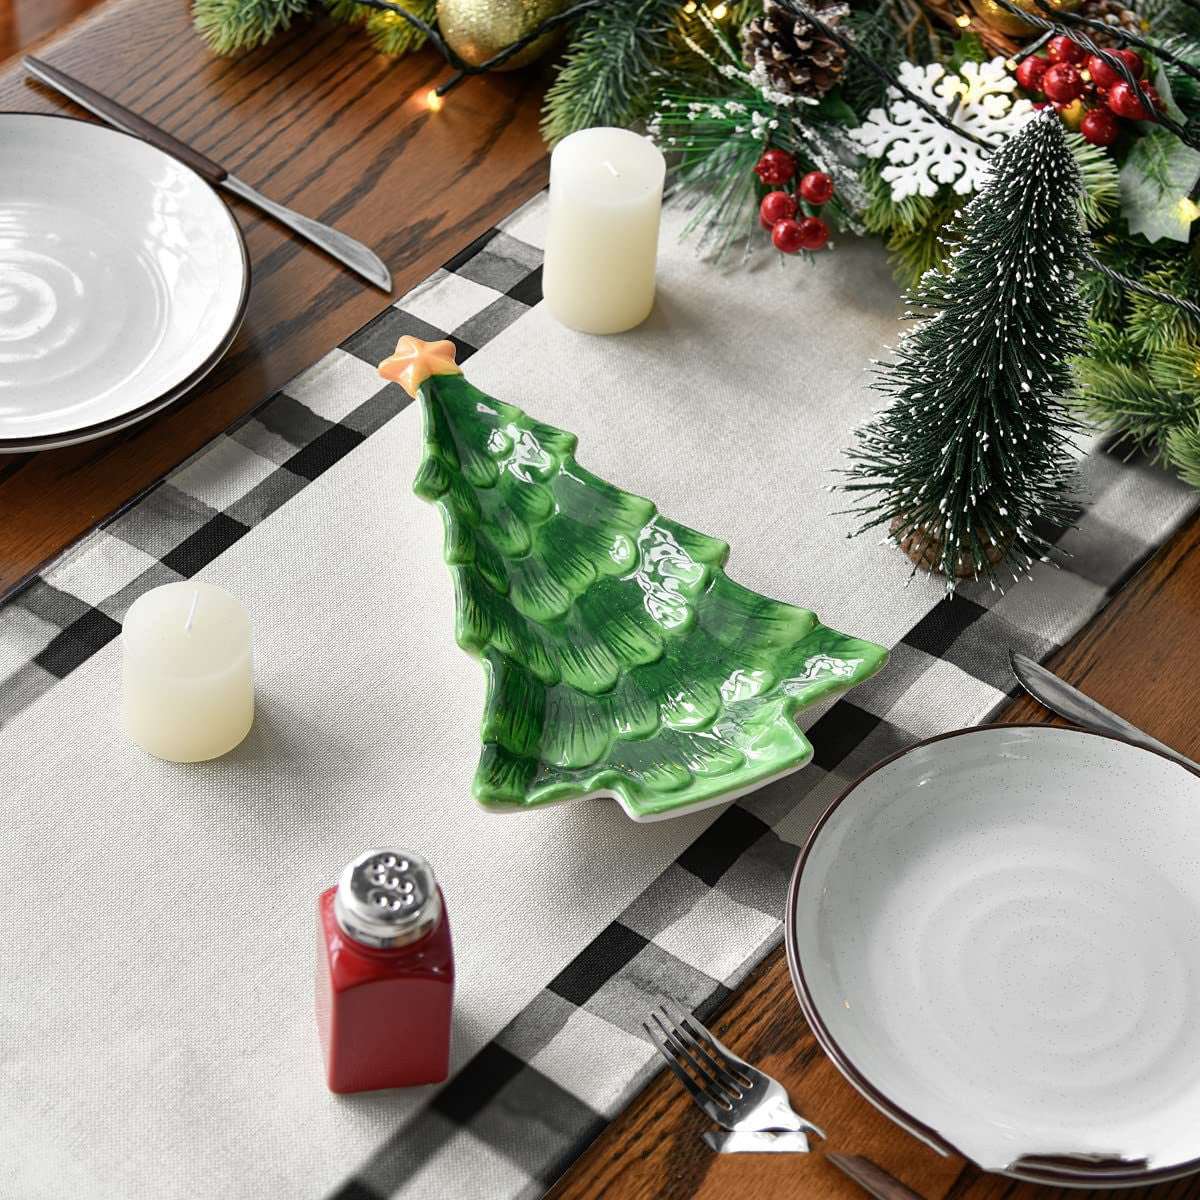 American Fashion Linen Tablecloth Mat Christmas, Outdoor and Indoor Christmas decorations Items, Christmas ornaments, Christmas tree decorations, salt dough ornaments, Christmas window decorations, cheap Christmas decorations, snowmen, and ornaments.